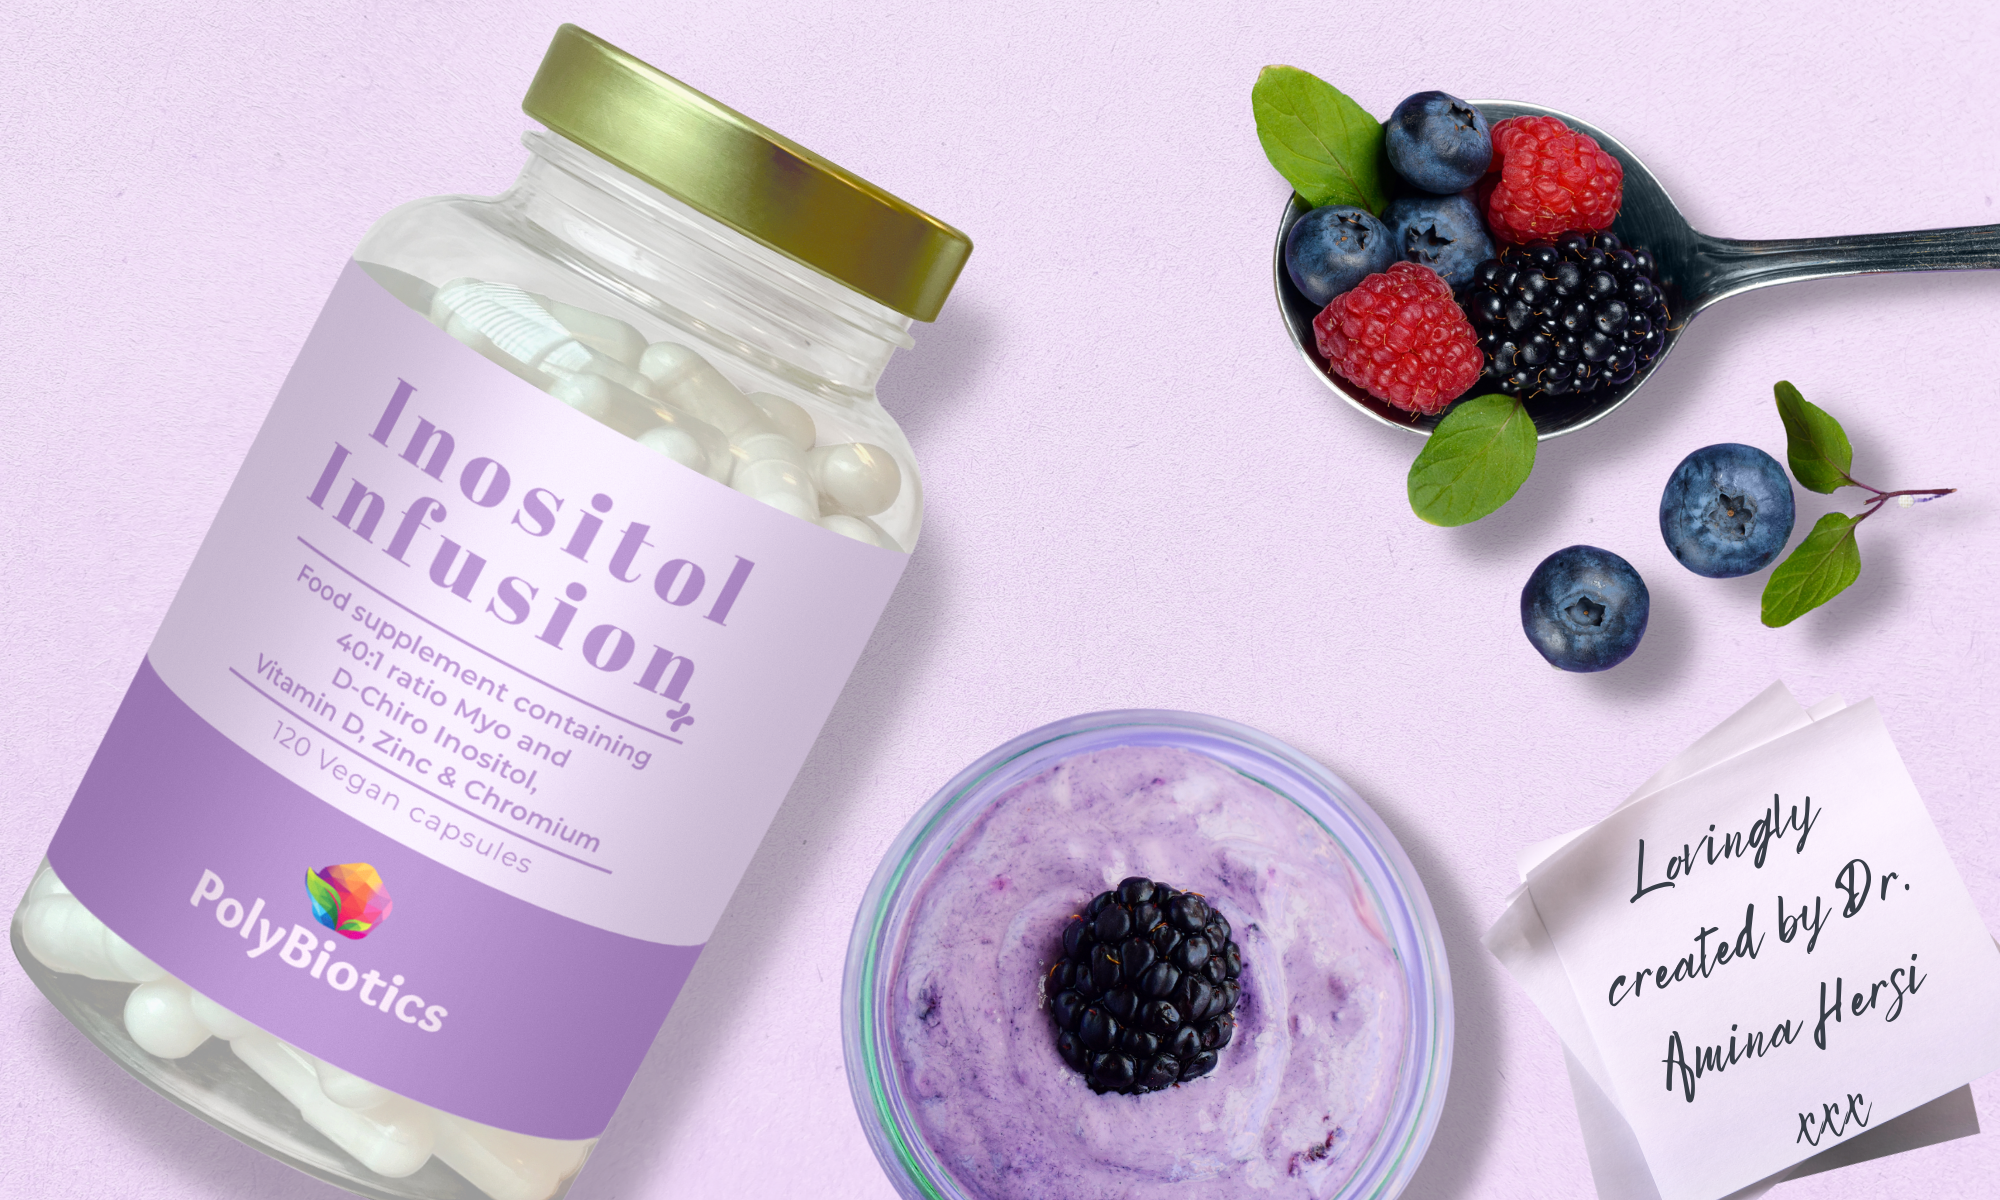 Lavender flat lay - Inositol infusion+ bottle with chia pudding, berries and a note that says "Lovingly created by Dr. Amina Hersi XXX"